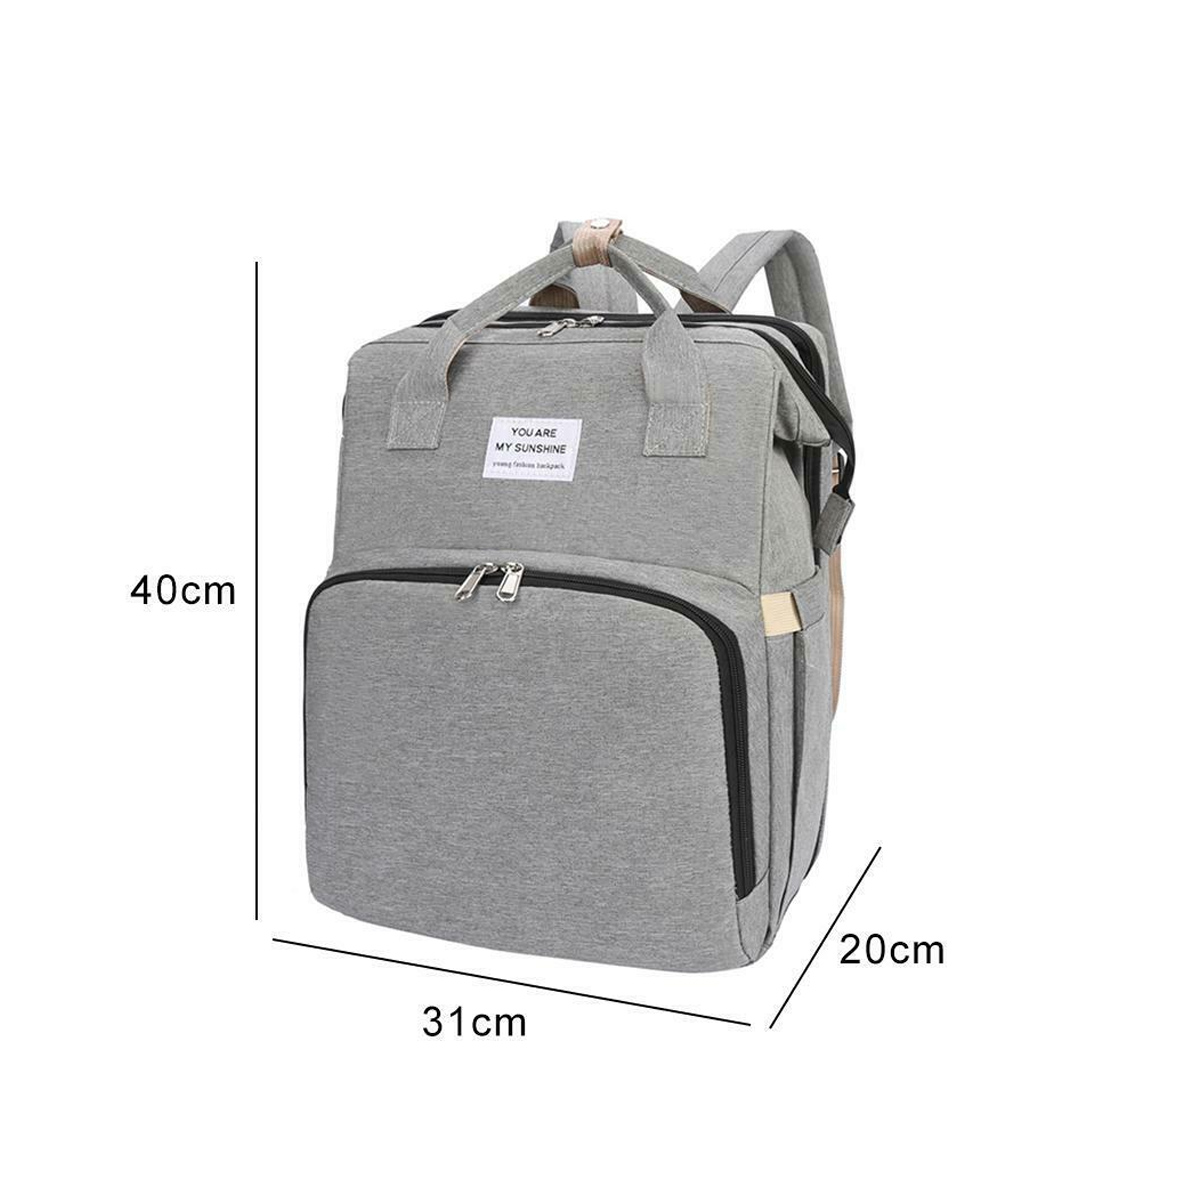 Portable-Diaper-Bag-Folding-Baby-Travel-Large-Backapack-Outdoor-Foldable-Baby-Bed-Mommy-Bags-1759461-6